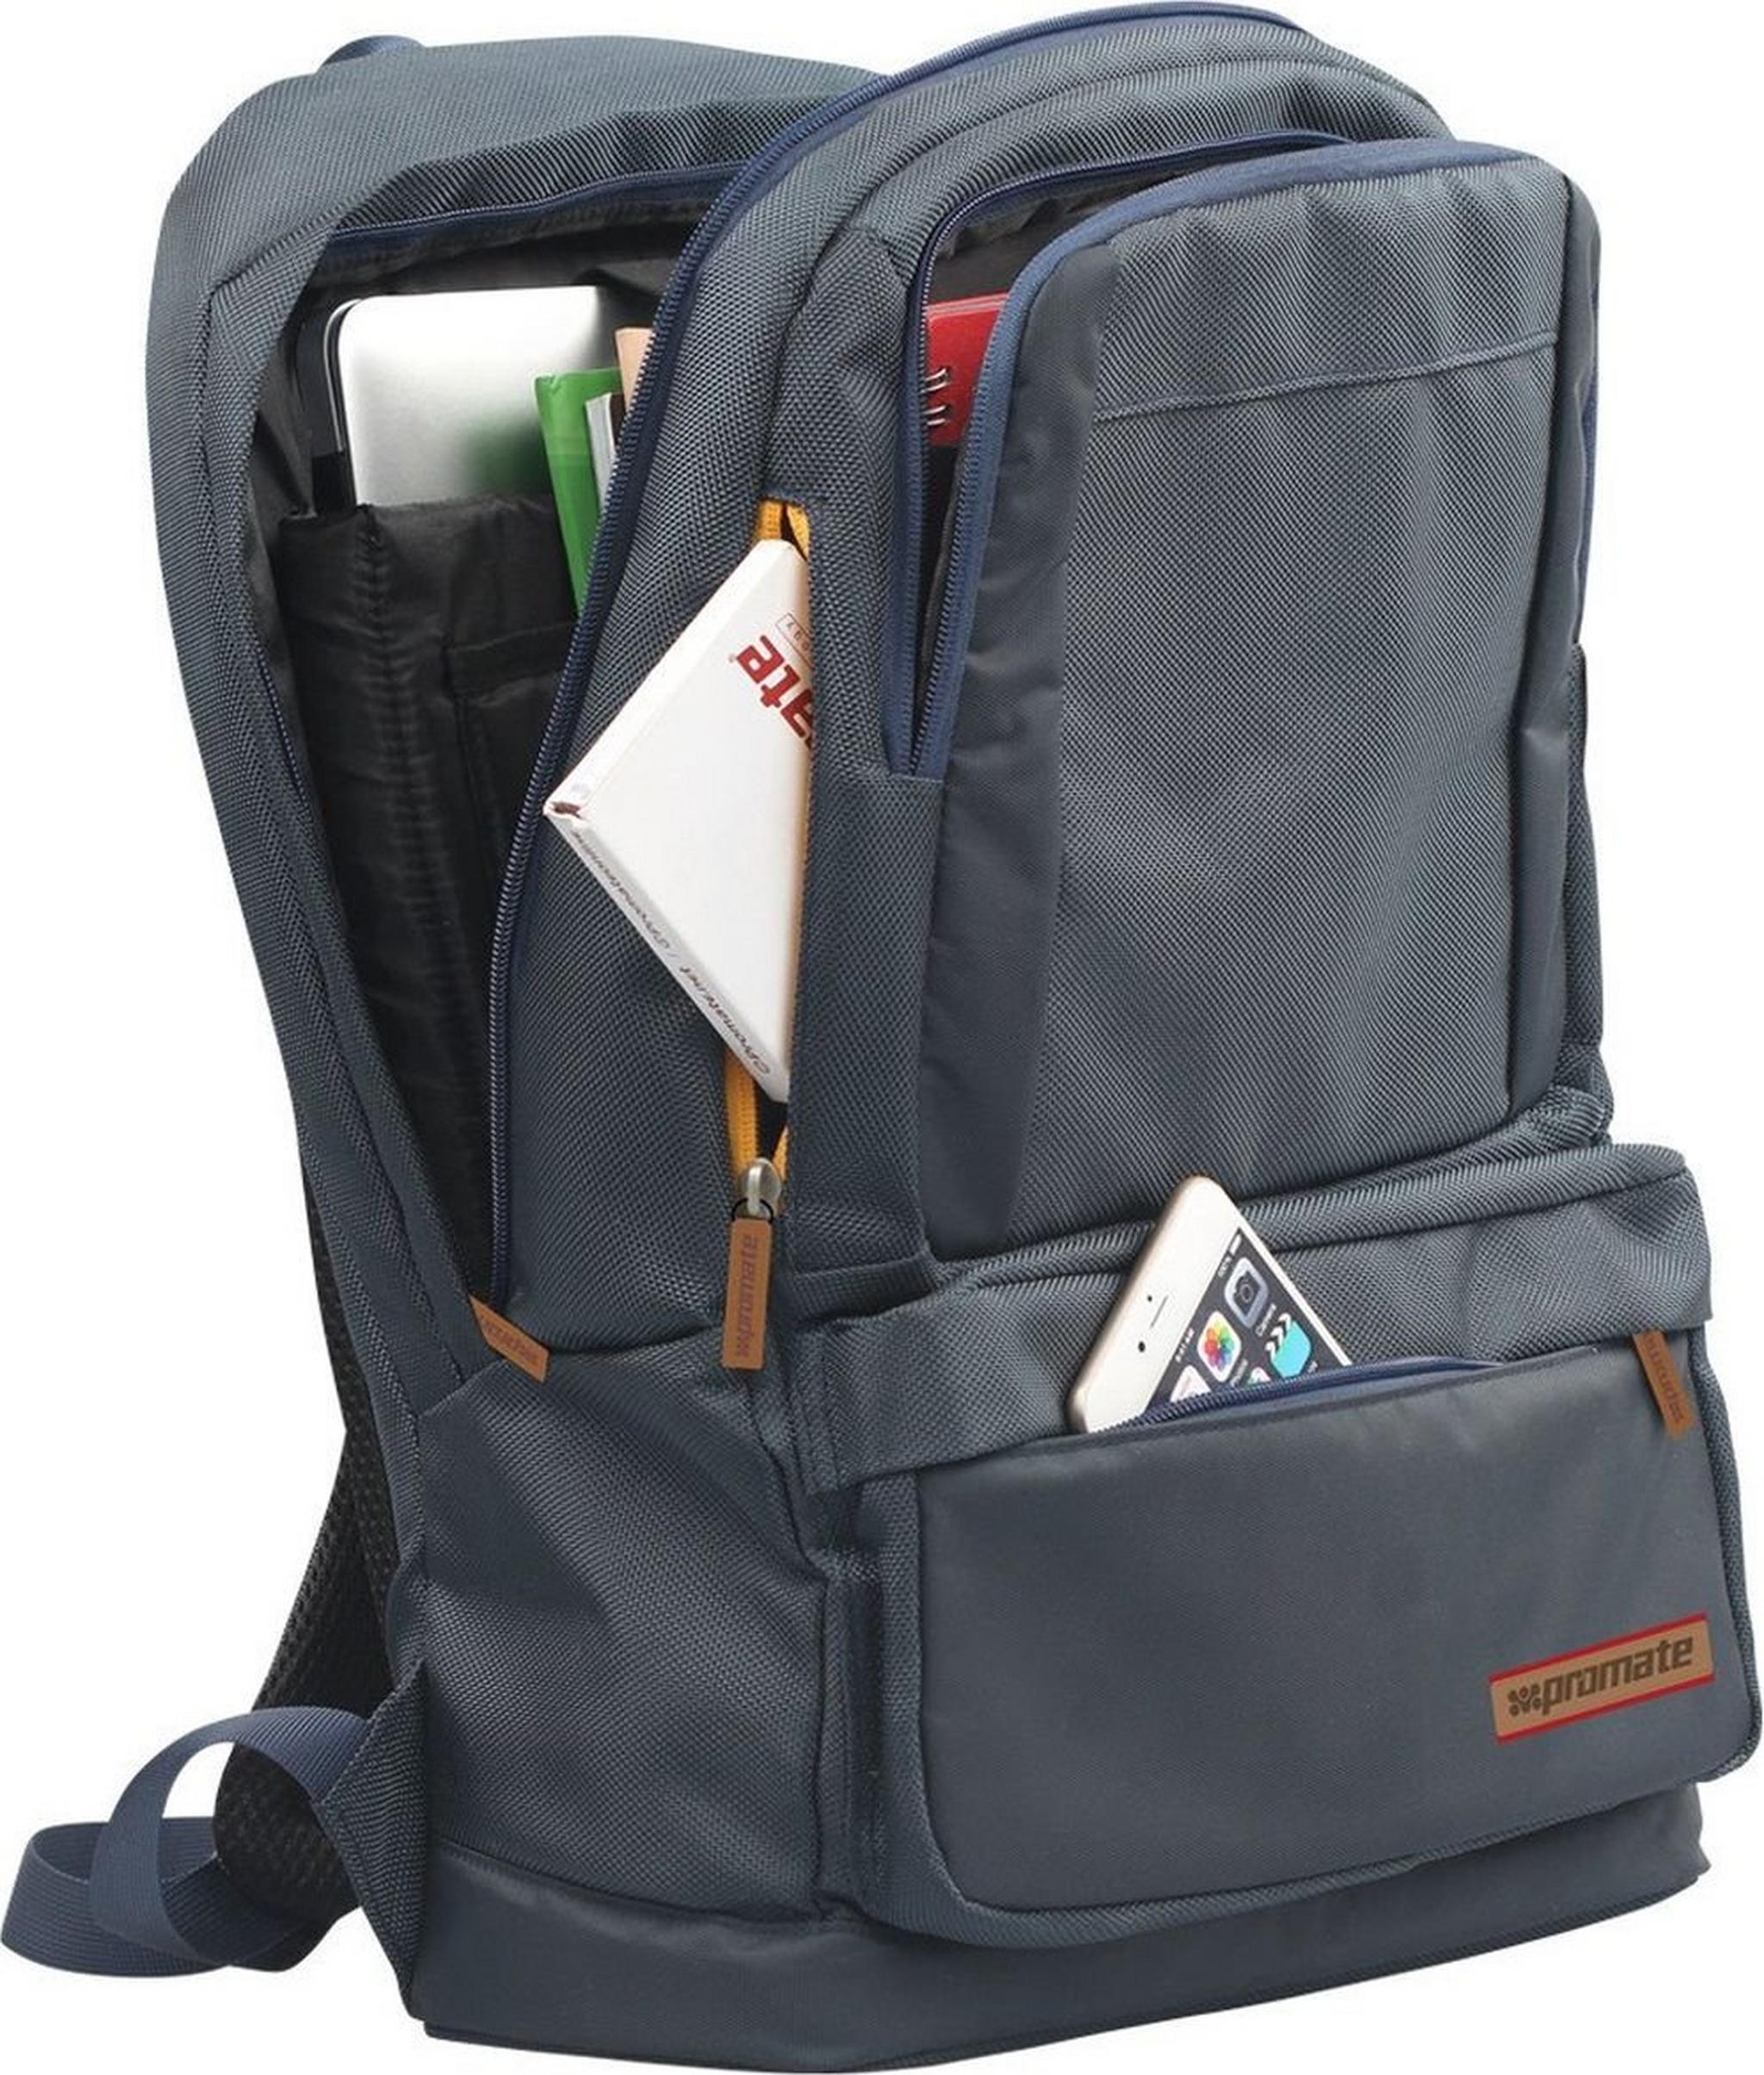 Promate Drake Lightweight Backpack For Laptops Up To 15.6-inch (DRAKE.BLUE) - Blue